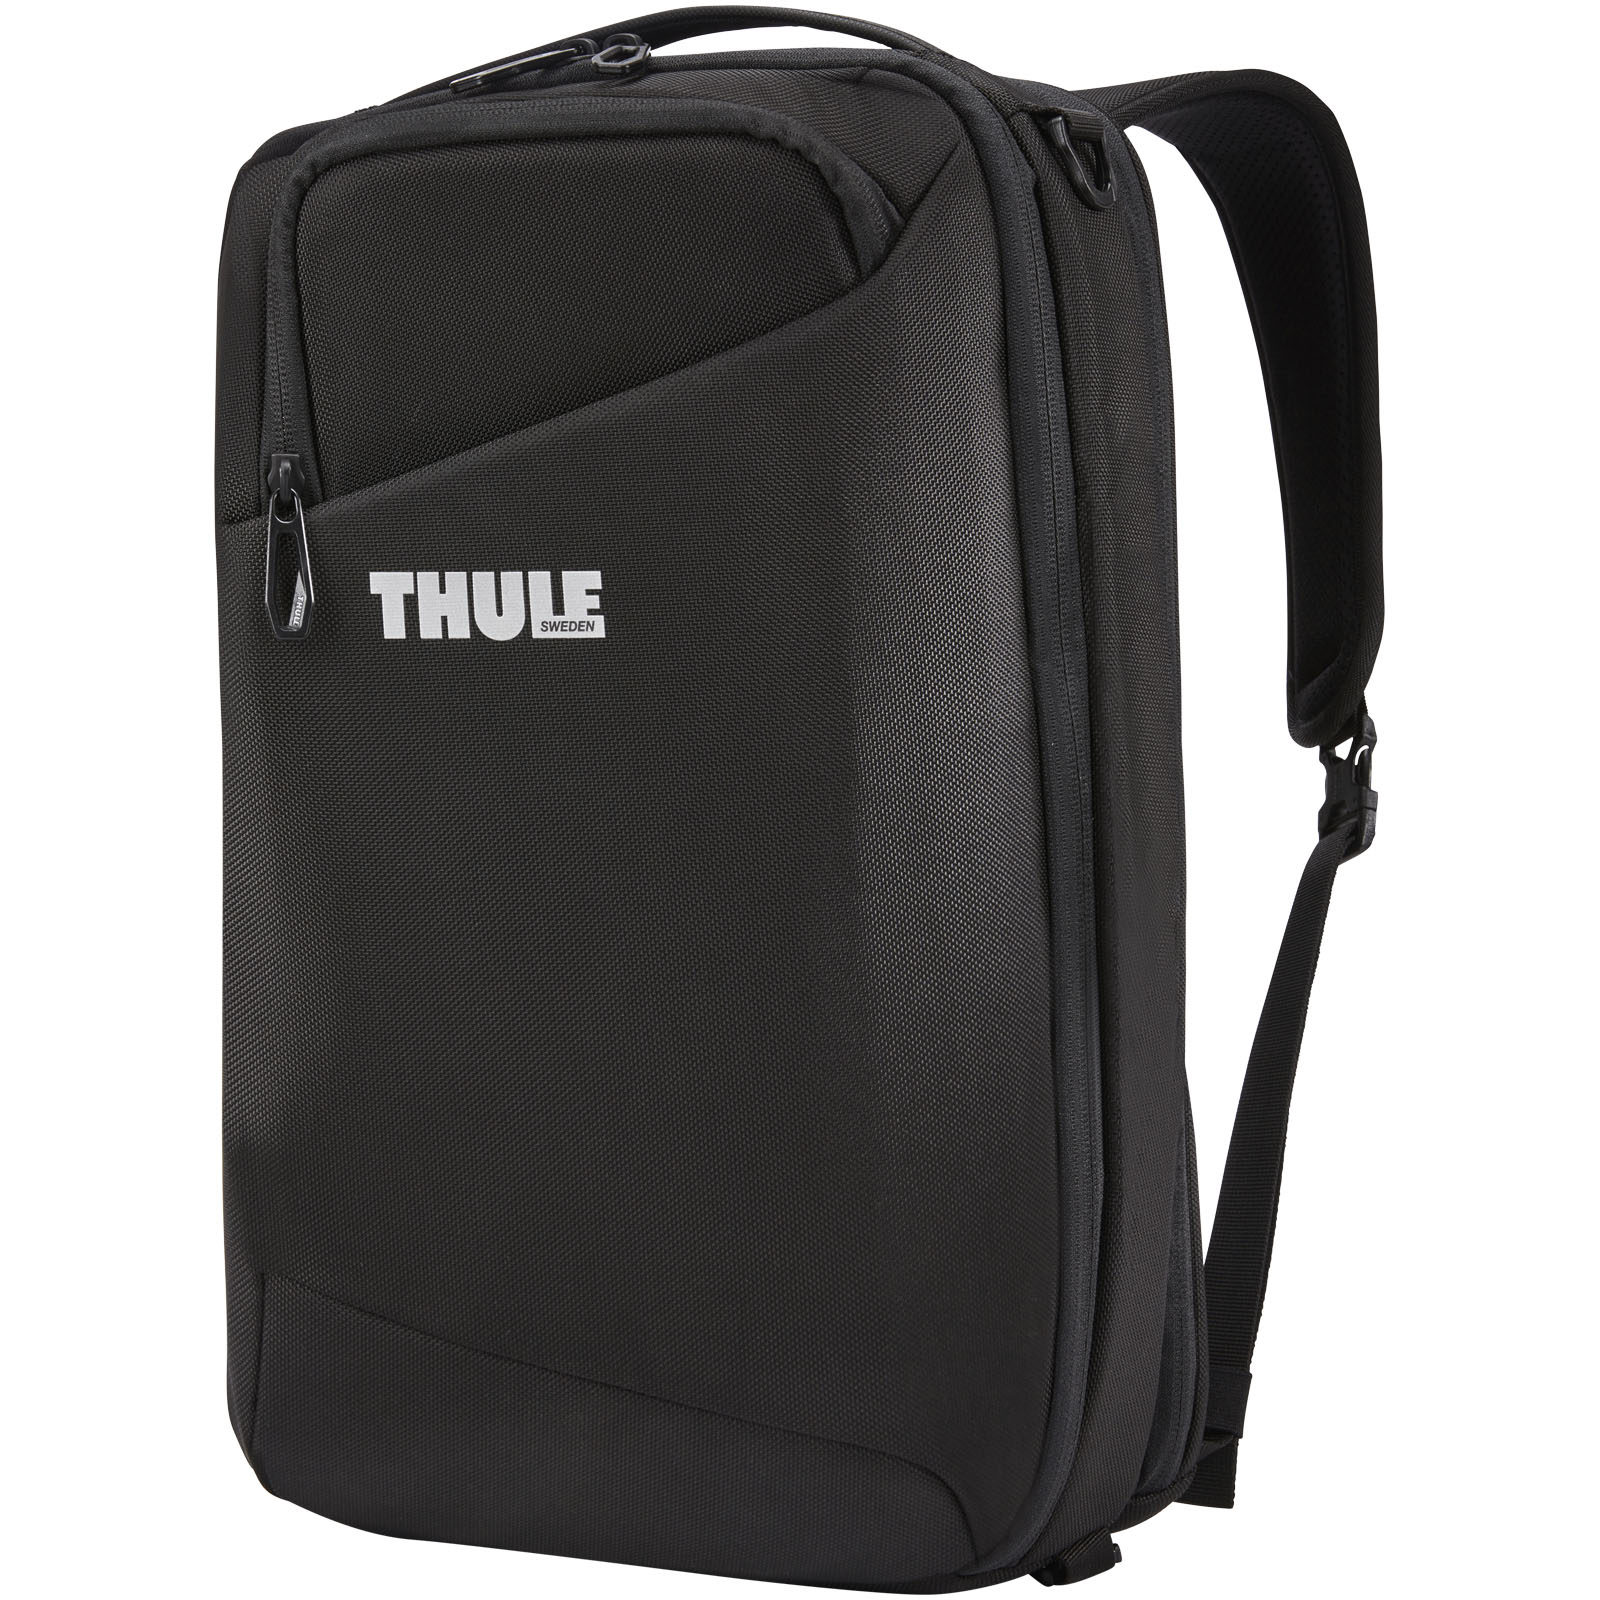 Bags - Thule Accent convertible backpack 17L